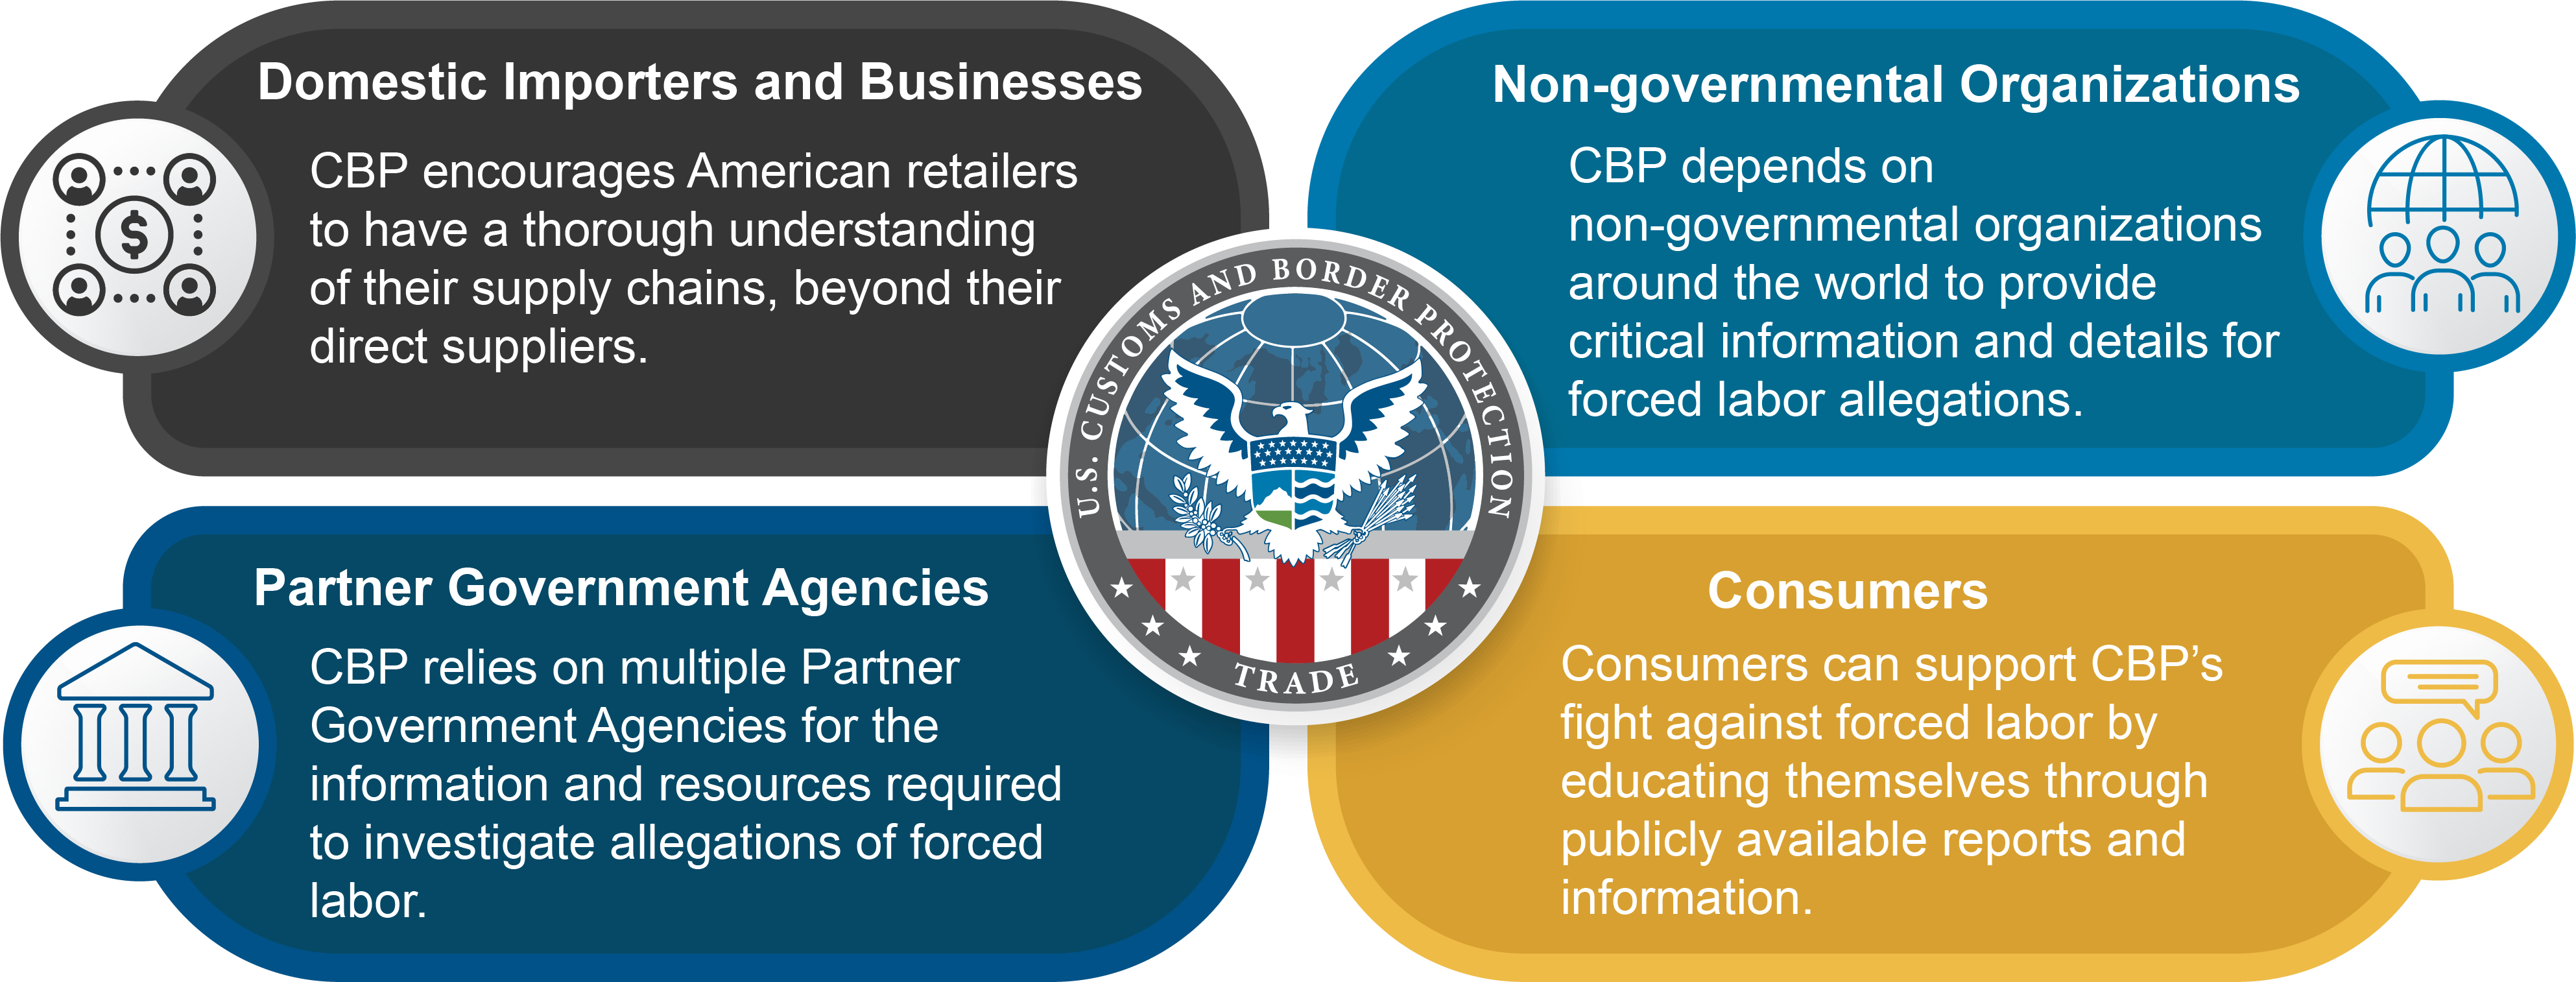 Domestic Importers and Businesses CBP encourages American retailers to have a thorough understanding of their supply chains, beyond their direct suppliers. CBP depends on non-governmental organizations around the world to provide critical info and details for forced labor allegations. CBP relies on multiple Partner Government Agencies for the info and resources required to investigate. Consumers can support CBP’s fight against forced labor by educating themselves through publicly available reports and info.